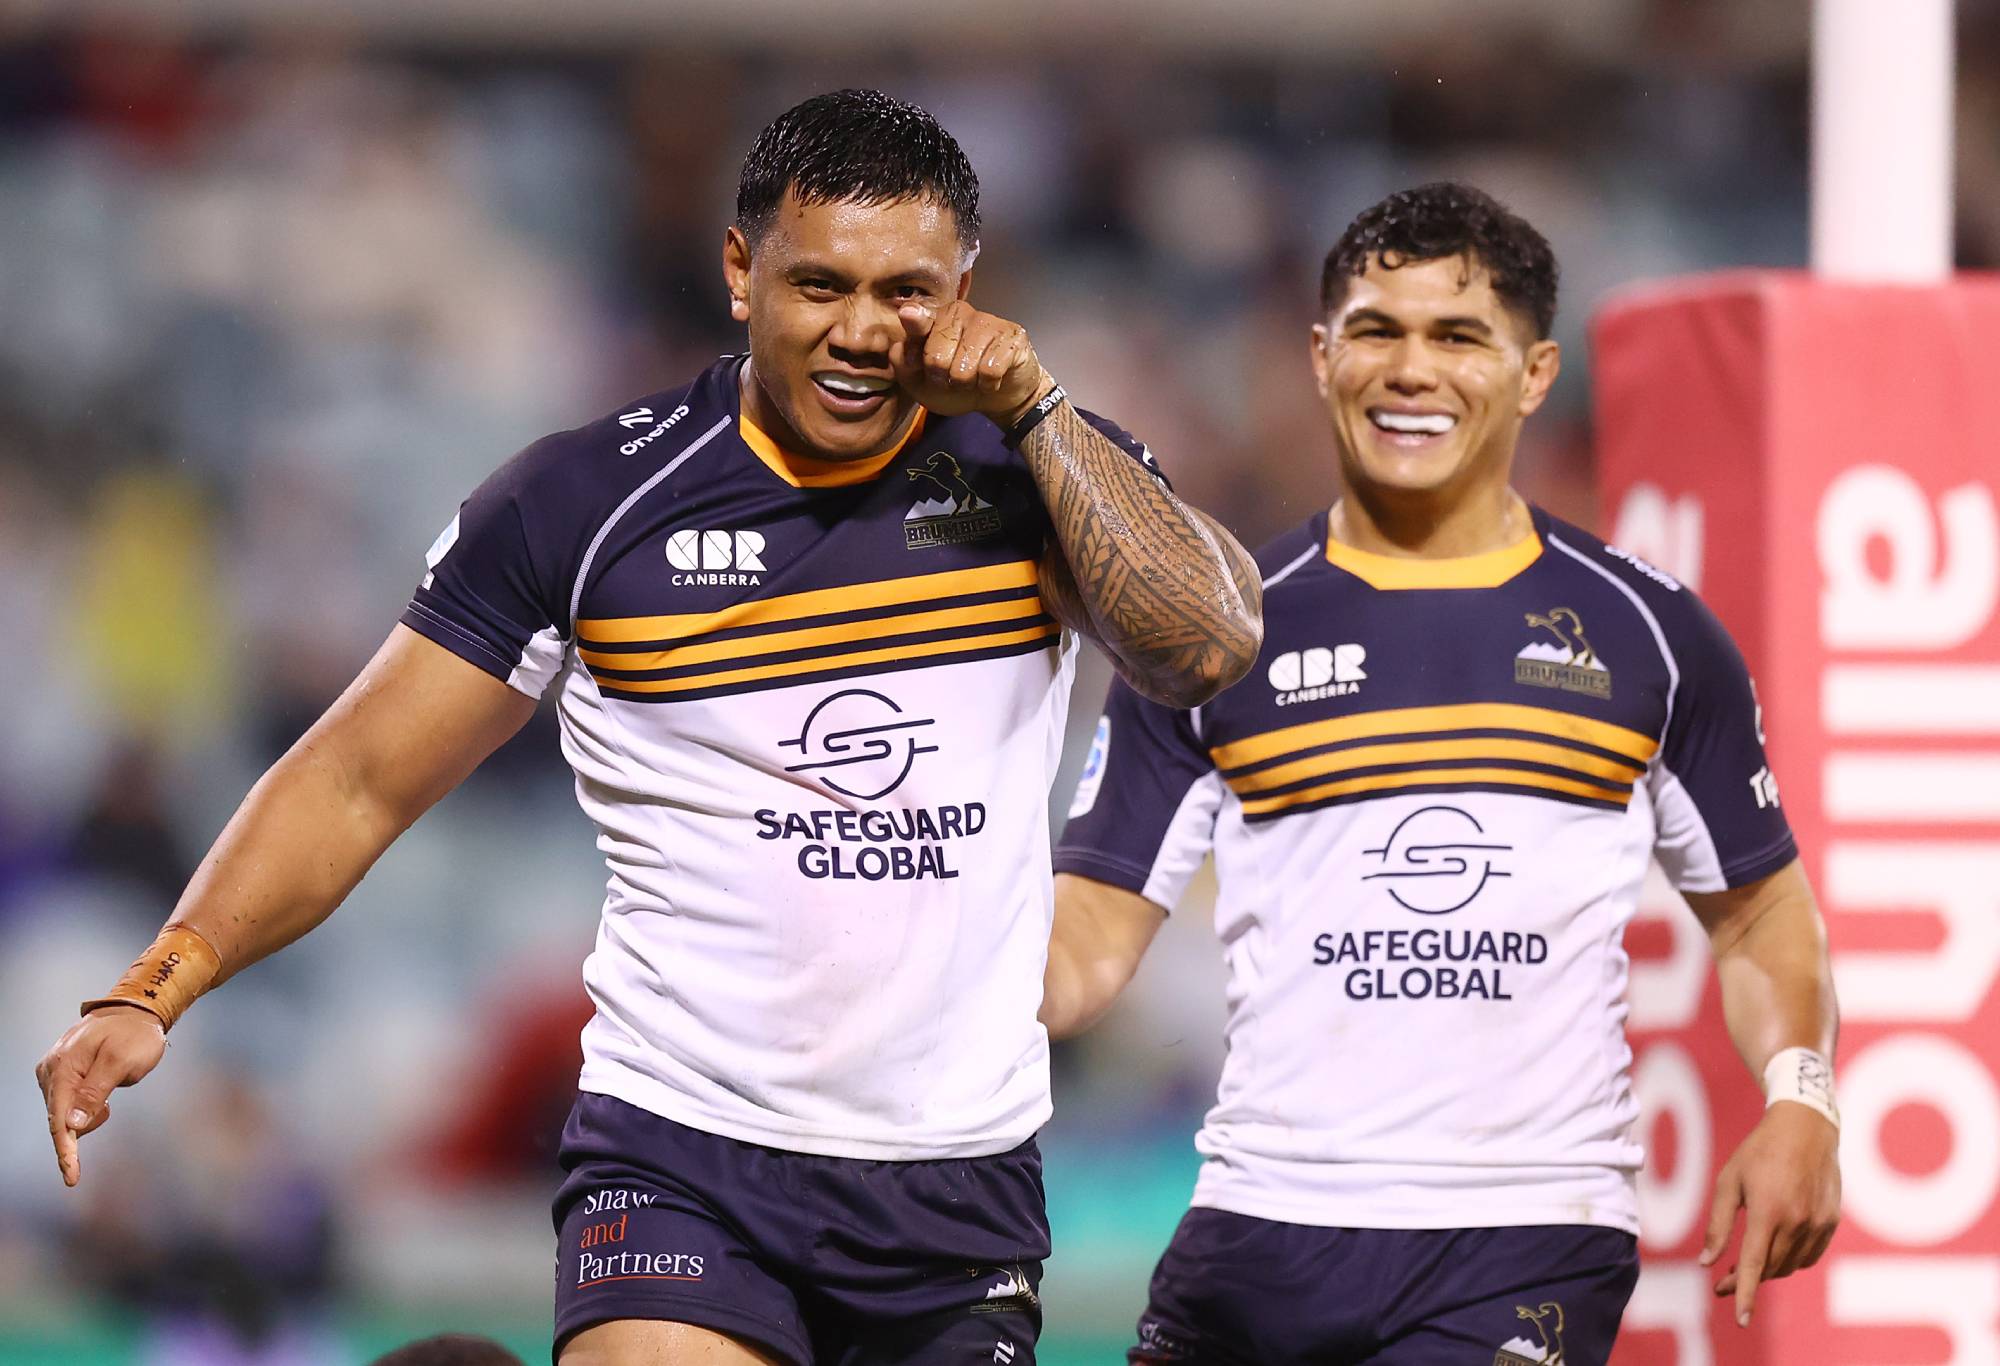 It’s hard to tell if some of Australia’s Super Rugby teams actually have a deep desire to win – or are they satisfied just playing?